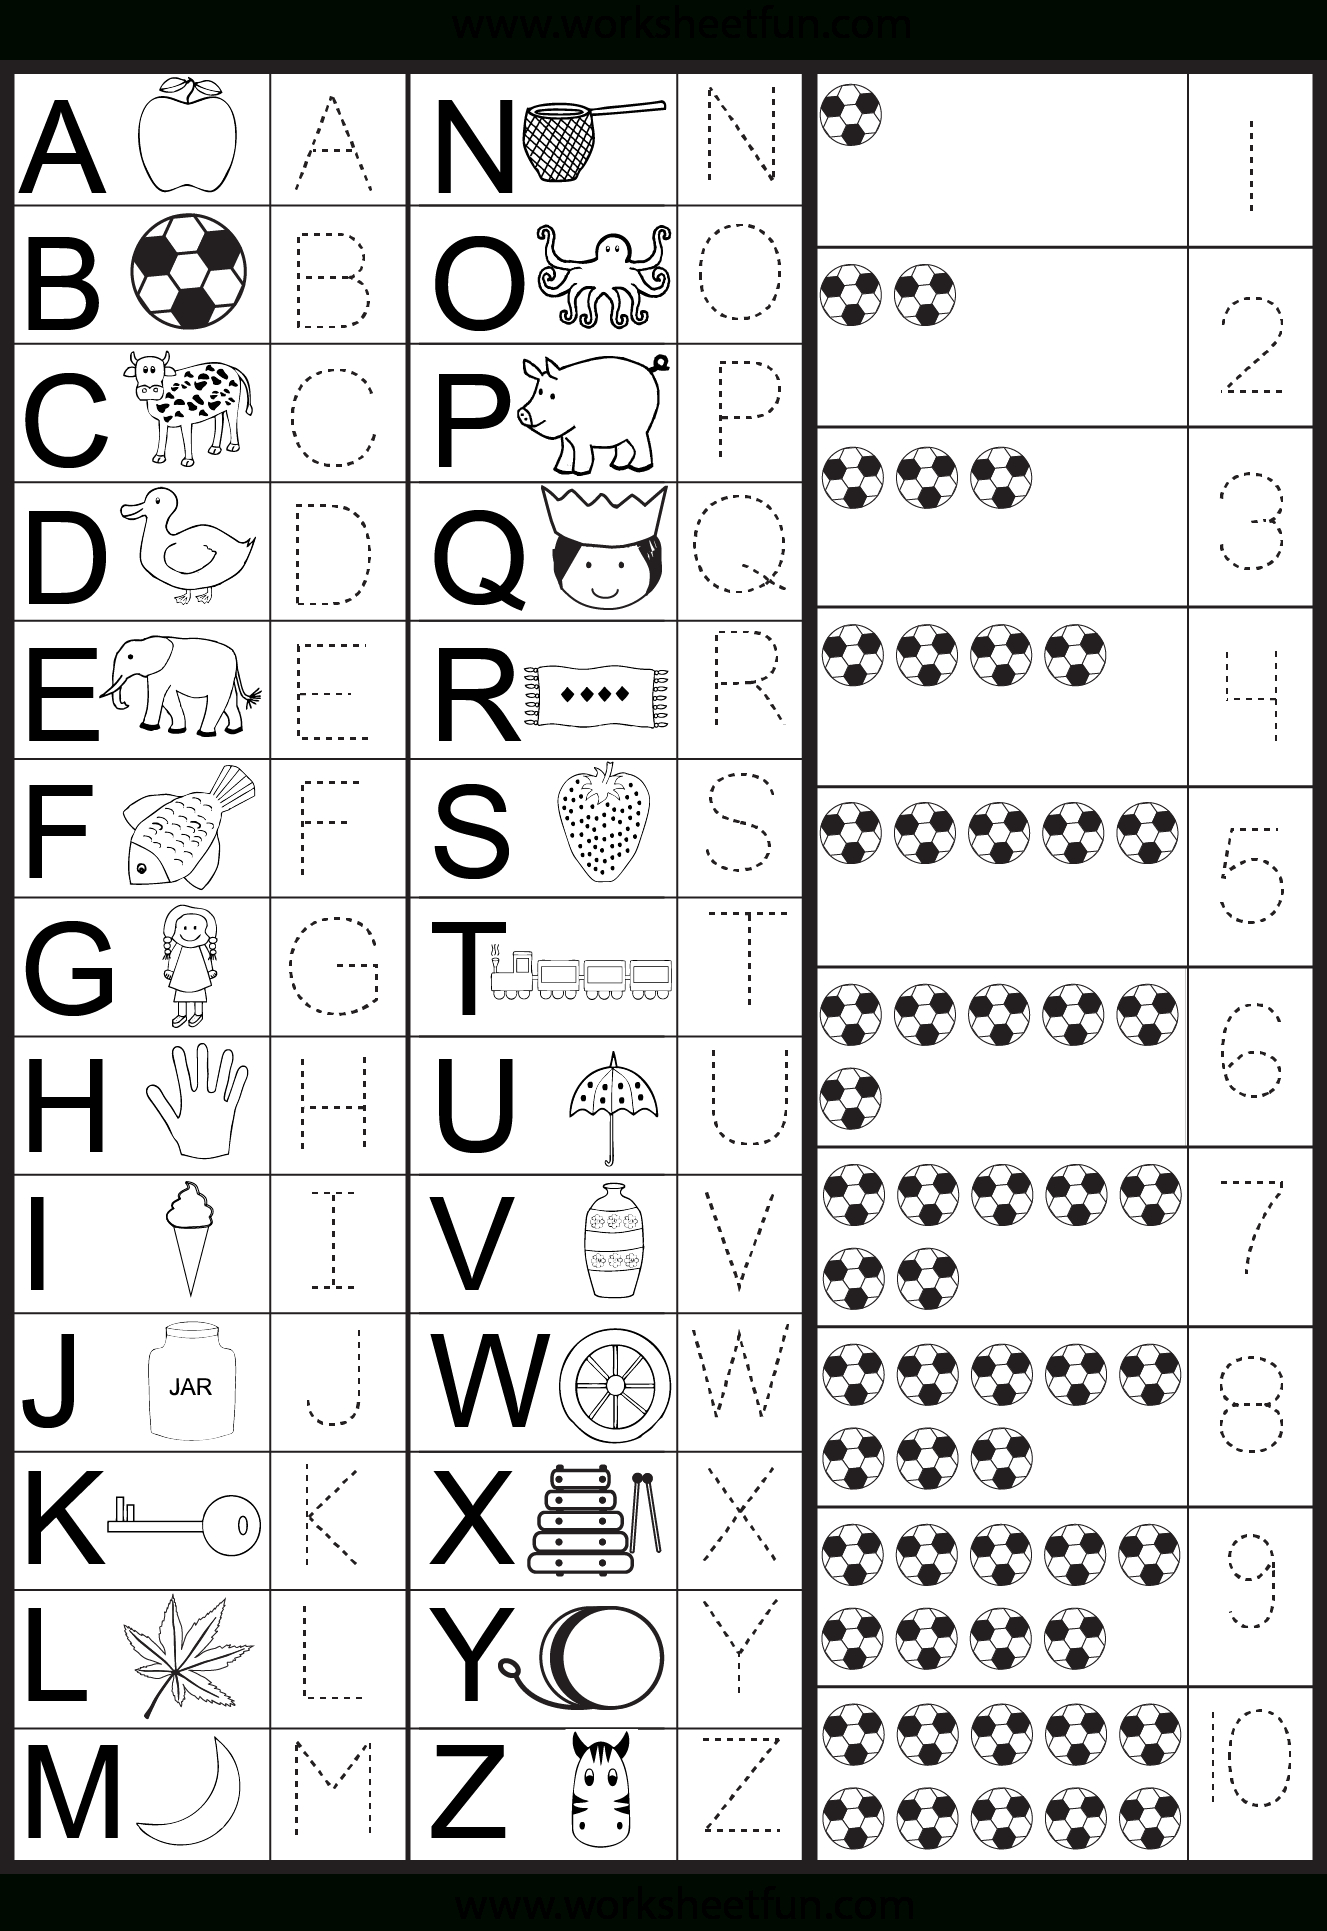 Free Tracing Ketters And Numbers | Letters And Numbers throughout Tracing Letters And Numbers For Kindergarten